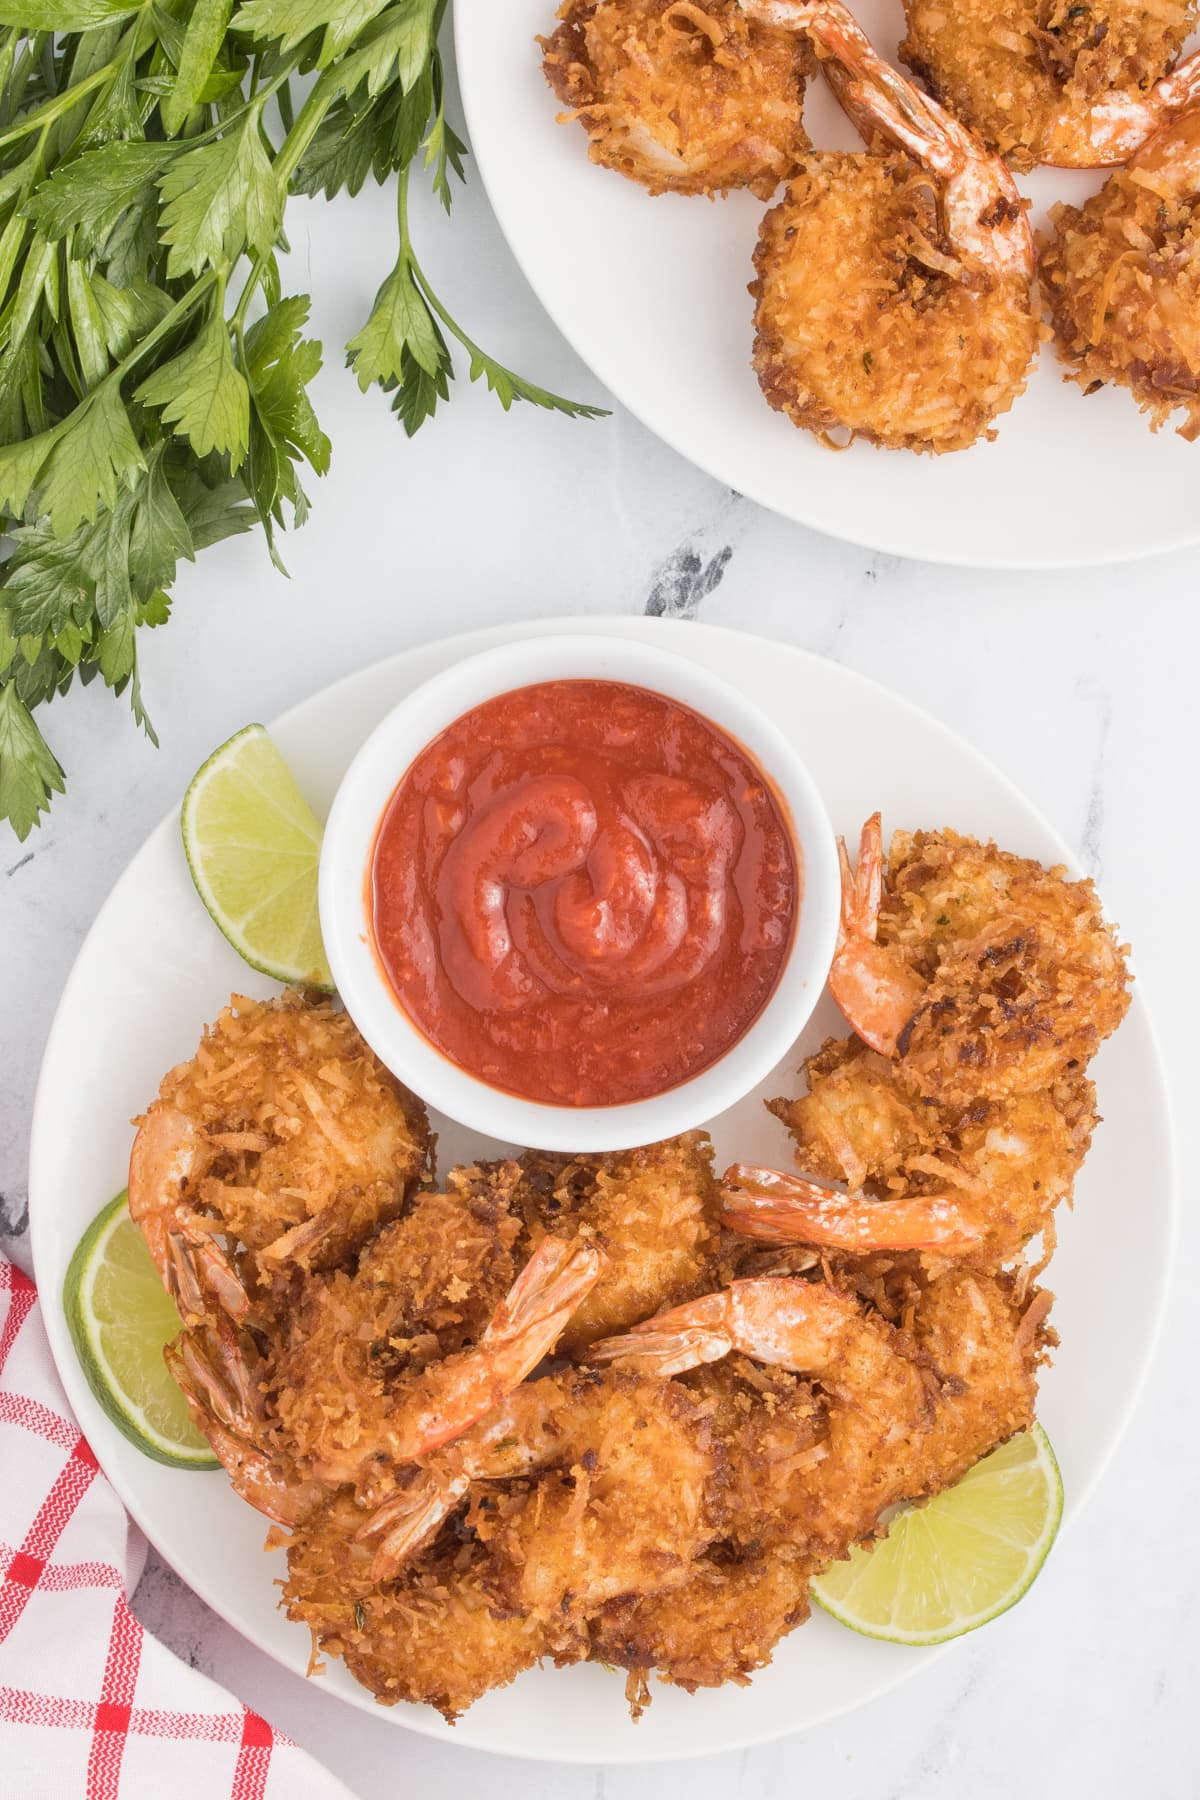 Overhead view of a plate of coconut shrimp with sauce